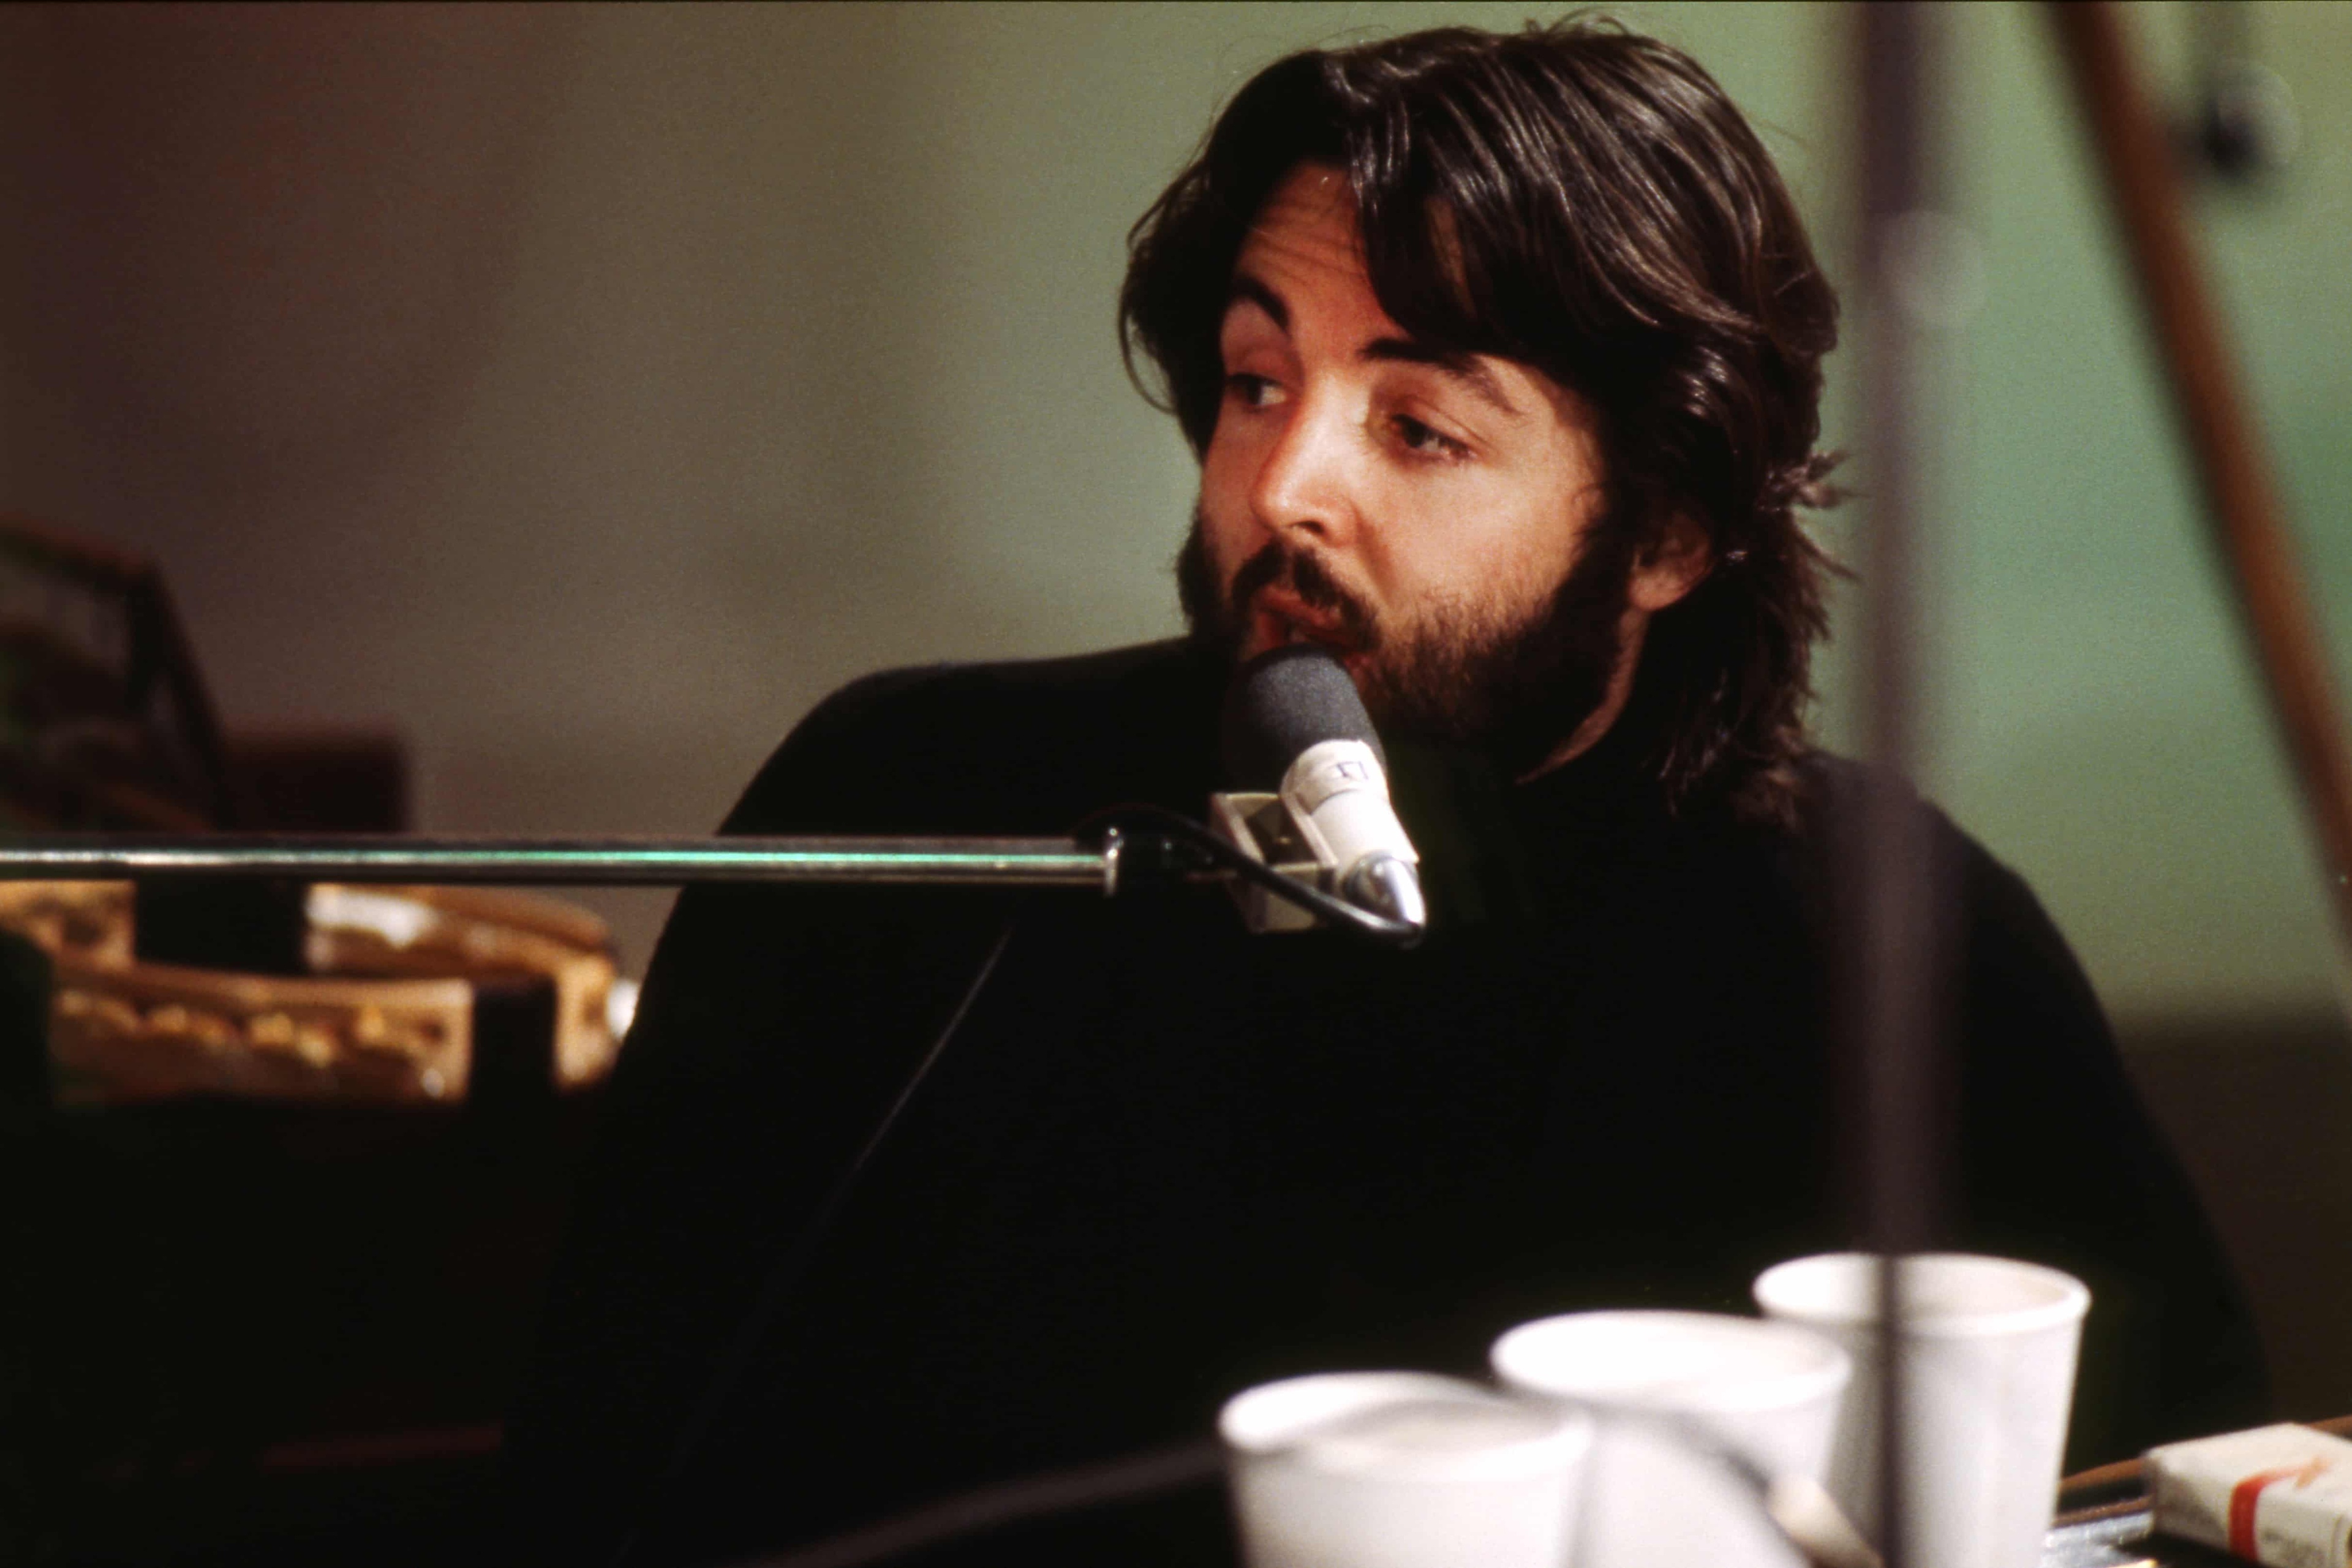 Paul sits at a piano singing into a mic